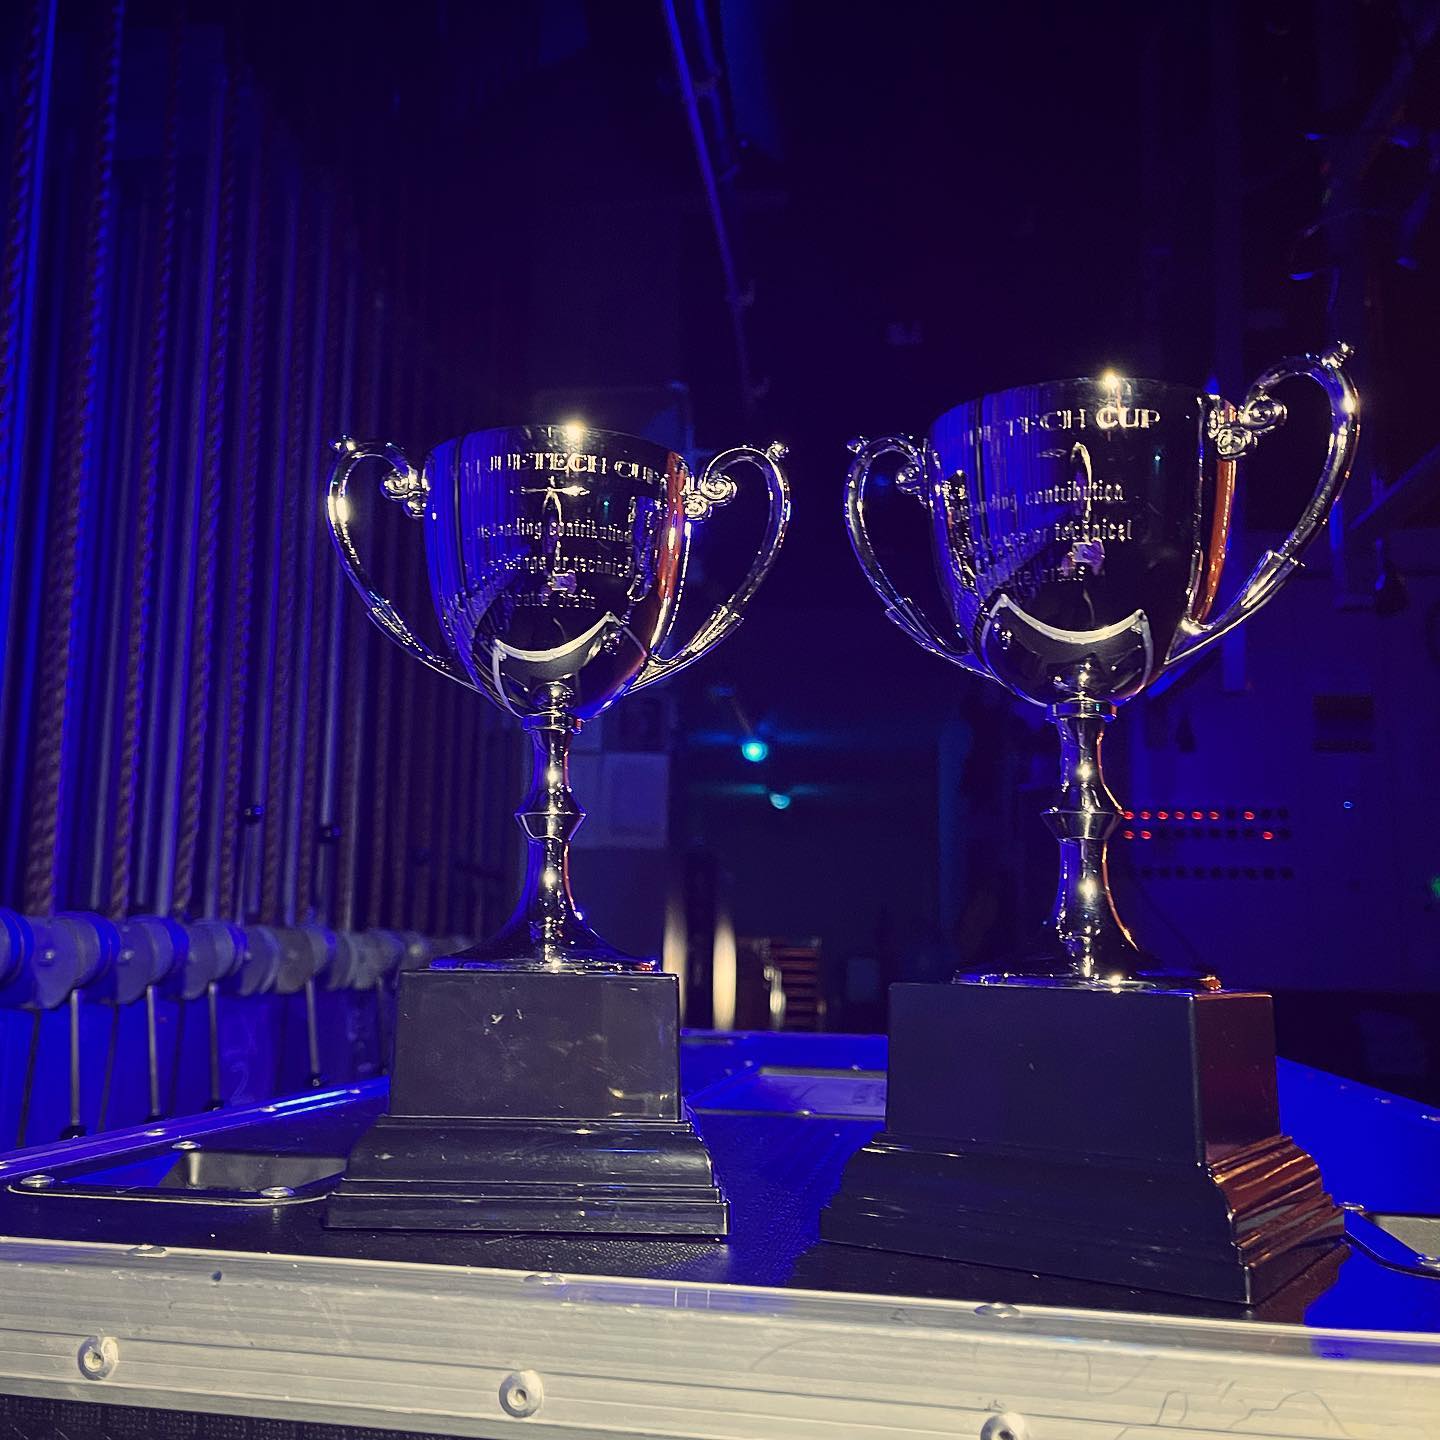 We are incredibly proud to be sponsoring a further pair of perpetual backstage/tech trophies for the students of Nelson & Garin Colleges.

These VenueTech Cups will be awarded to students of any age to acknowledge their ‘outstanding contribution to backstage or technical theatre craft’. 

We value the positive impact that high school drama rooms, halls and tech booths have as development grounds for the future of our industry, so are keen to support celebrating those rangitahi who dedicate so much of themselves to support their peers onstage.